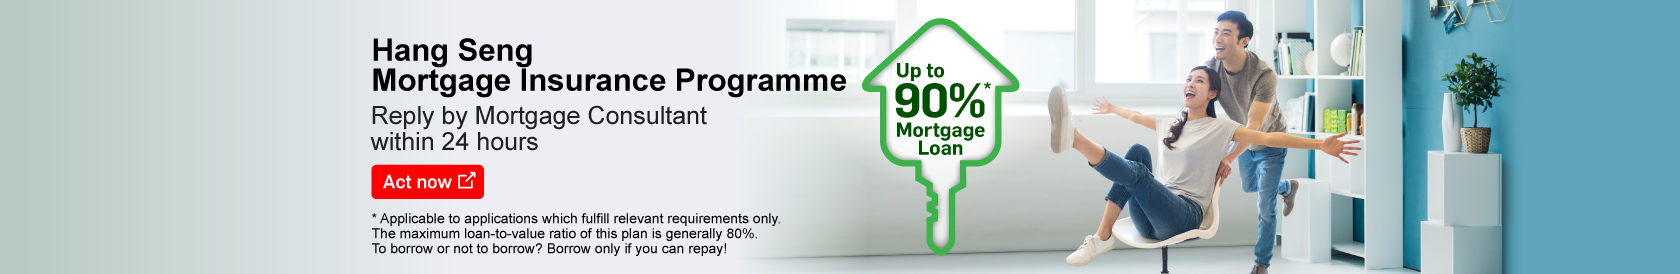 Act now, our mortgage consultants will provide an initial assessment for you in 24 hours (Opens in a new window)